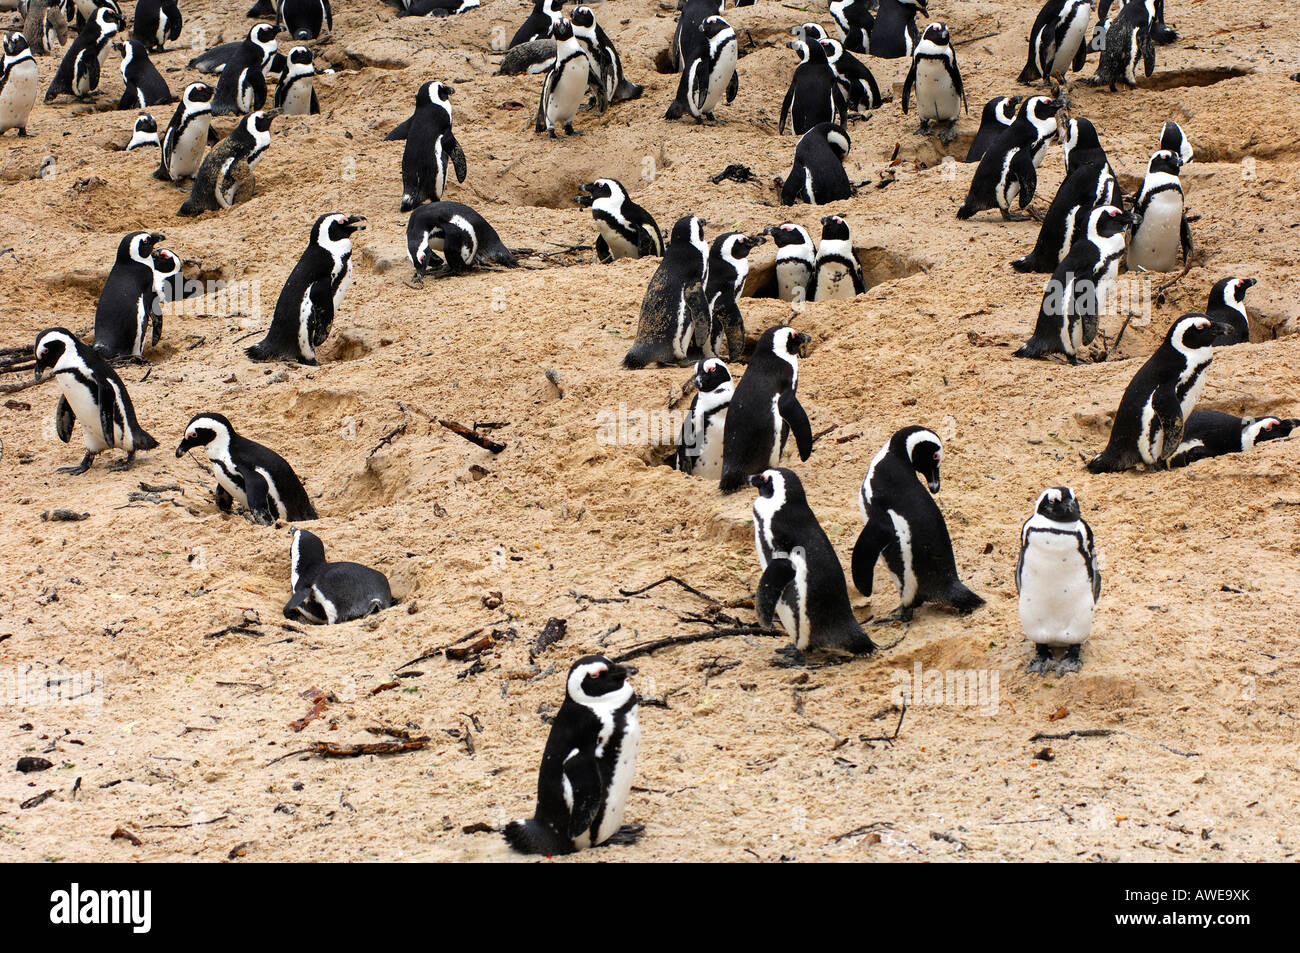 Colony, African penguin, Spheniscus Demersus, Boulders Beach, Simon's Town, Western Cape Province, South Africa Stock Photo